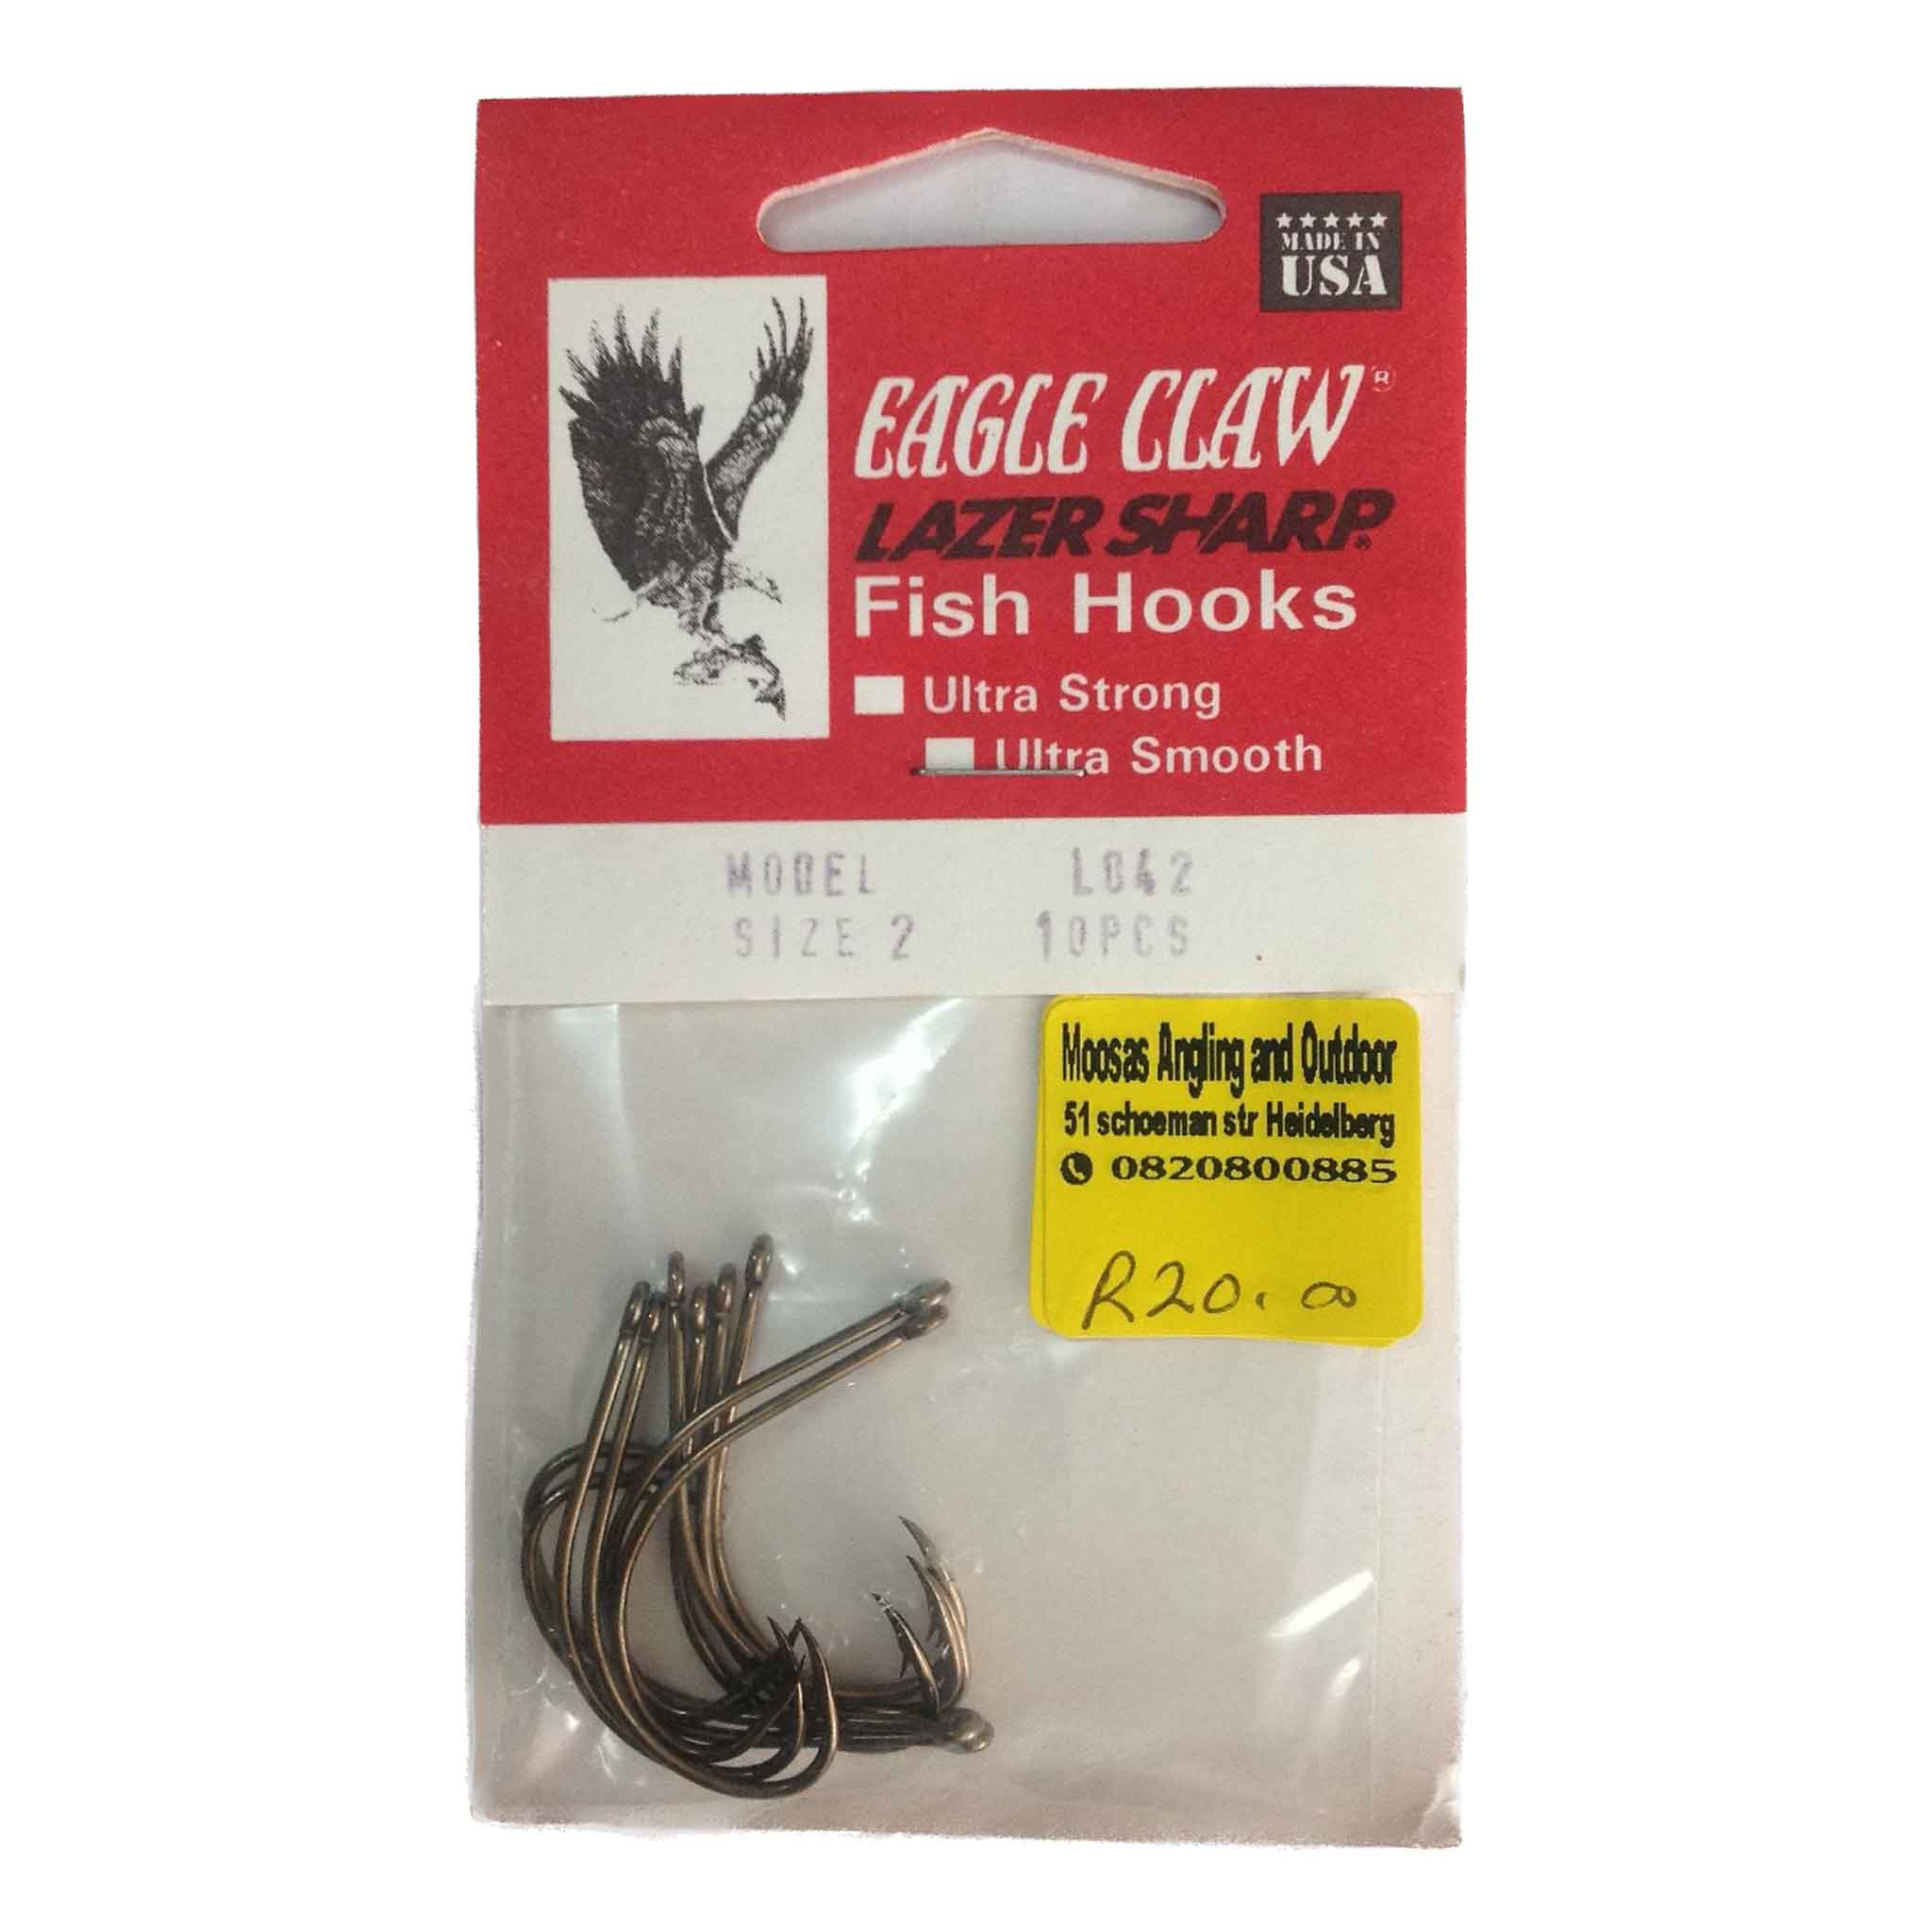 EAGLE CLAW LAZER SHARP FISH HOOKS MODEL 2 10 PCS - Moosa's Angling And  Outdoor